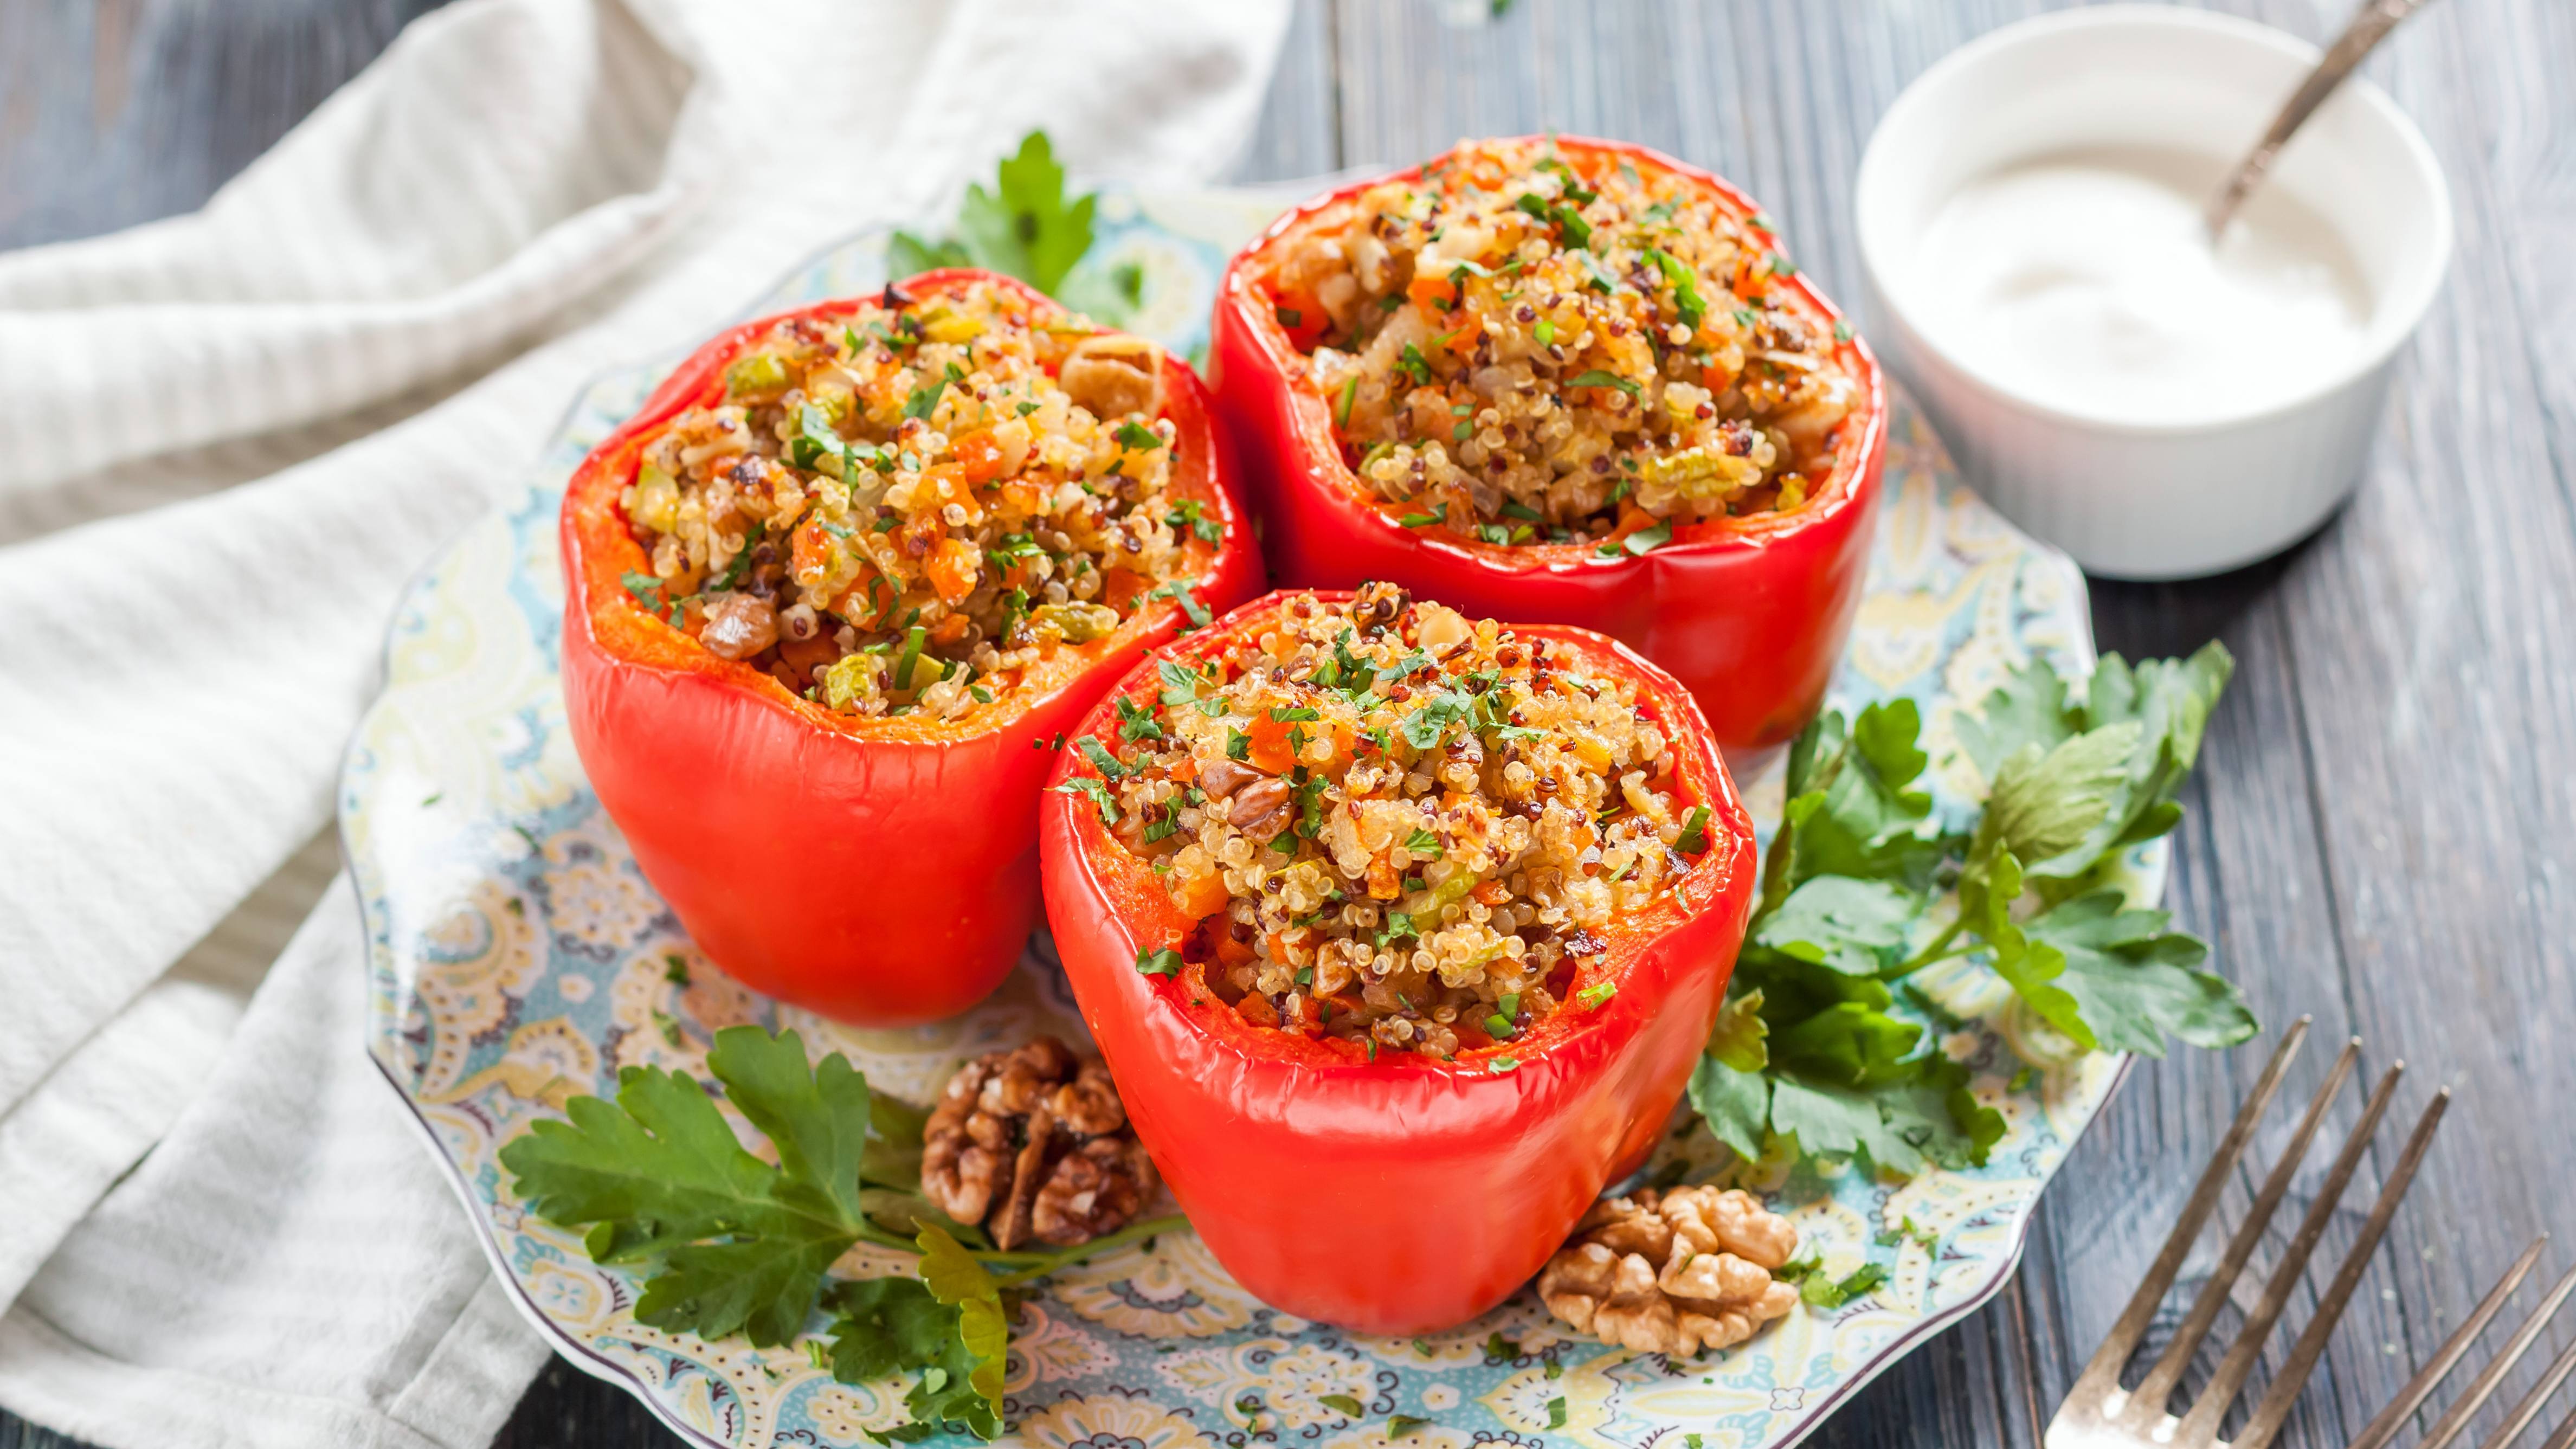 healthy vegetables, small stuffed peppers with quinoa and walnuts